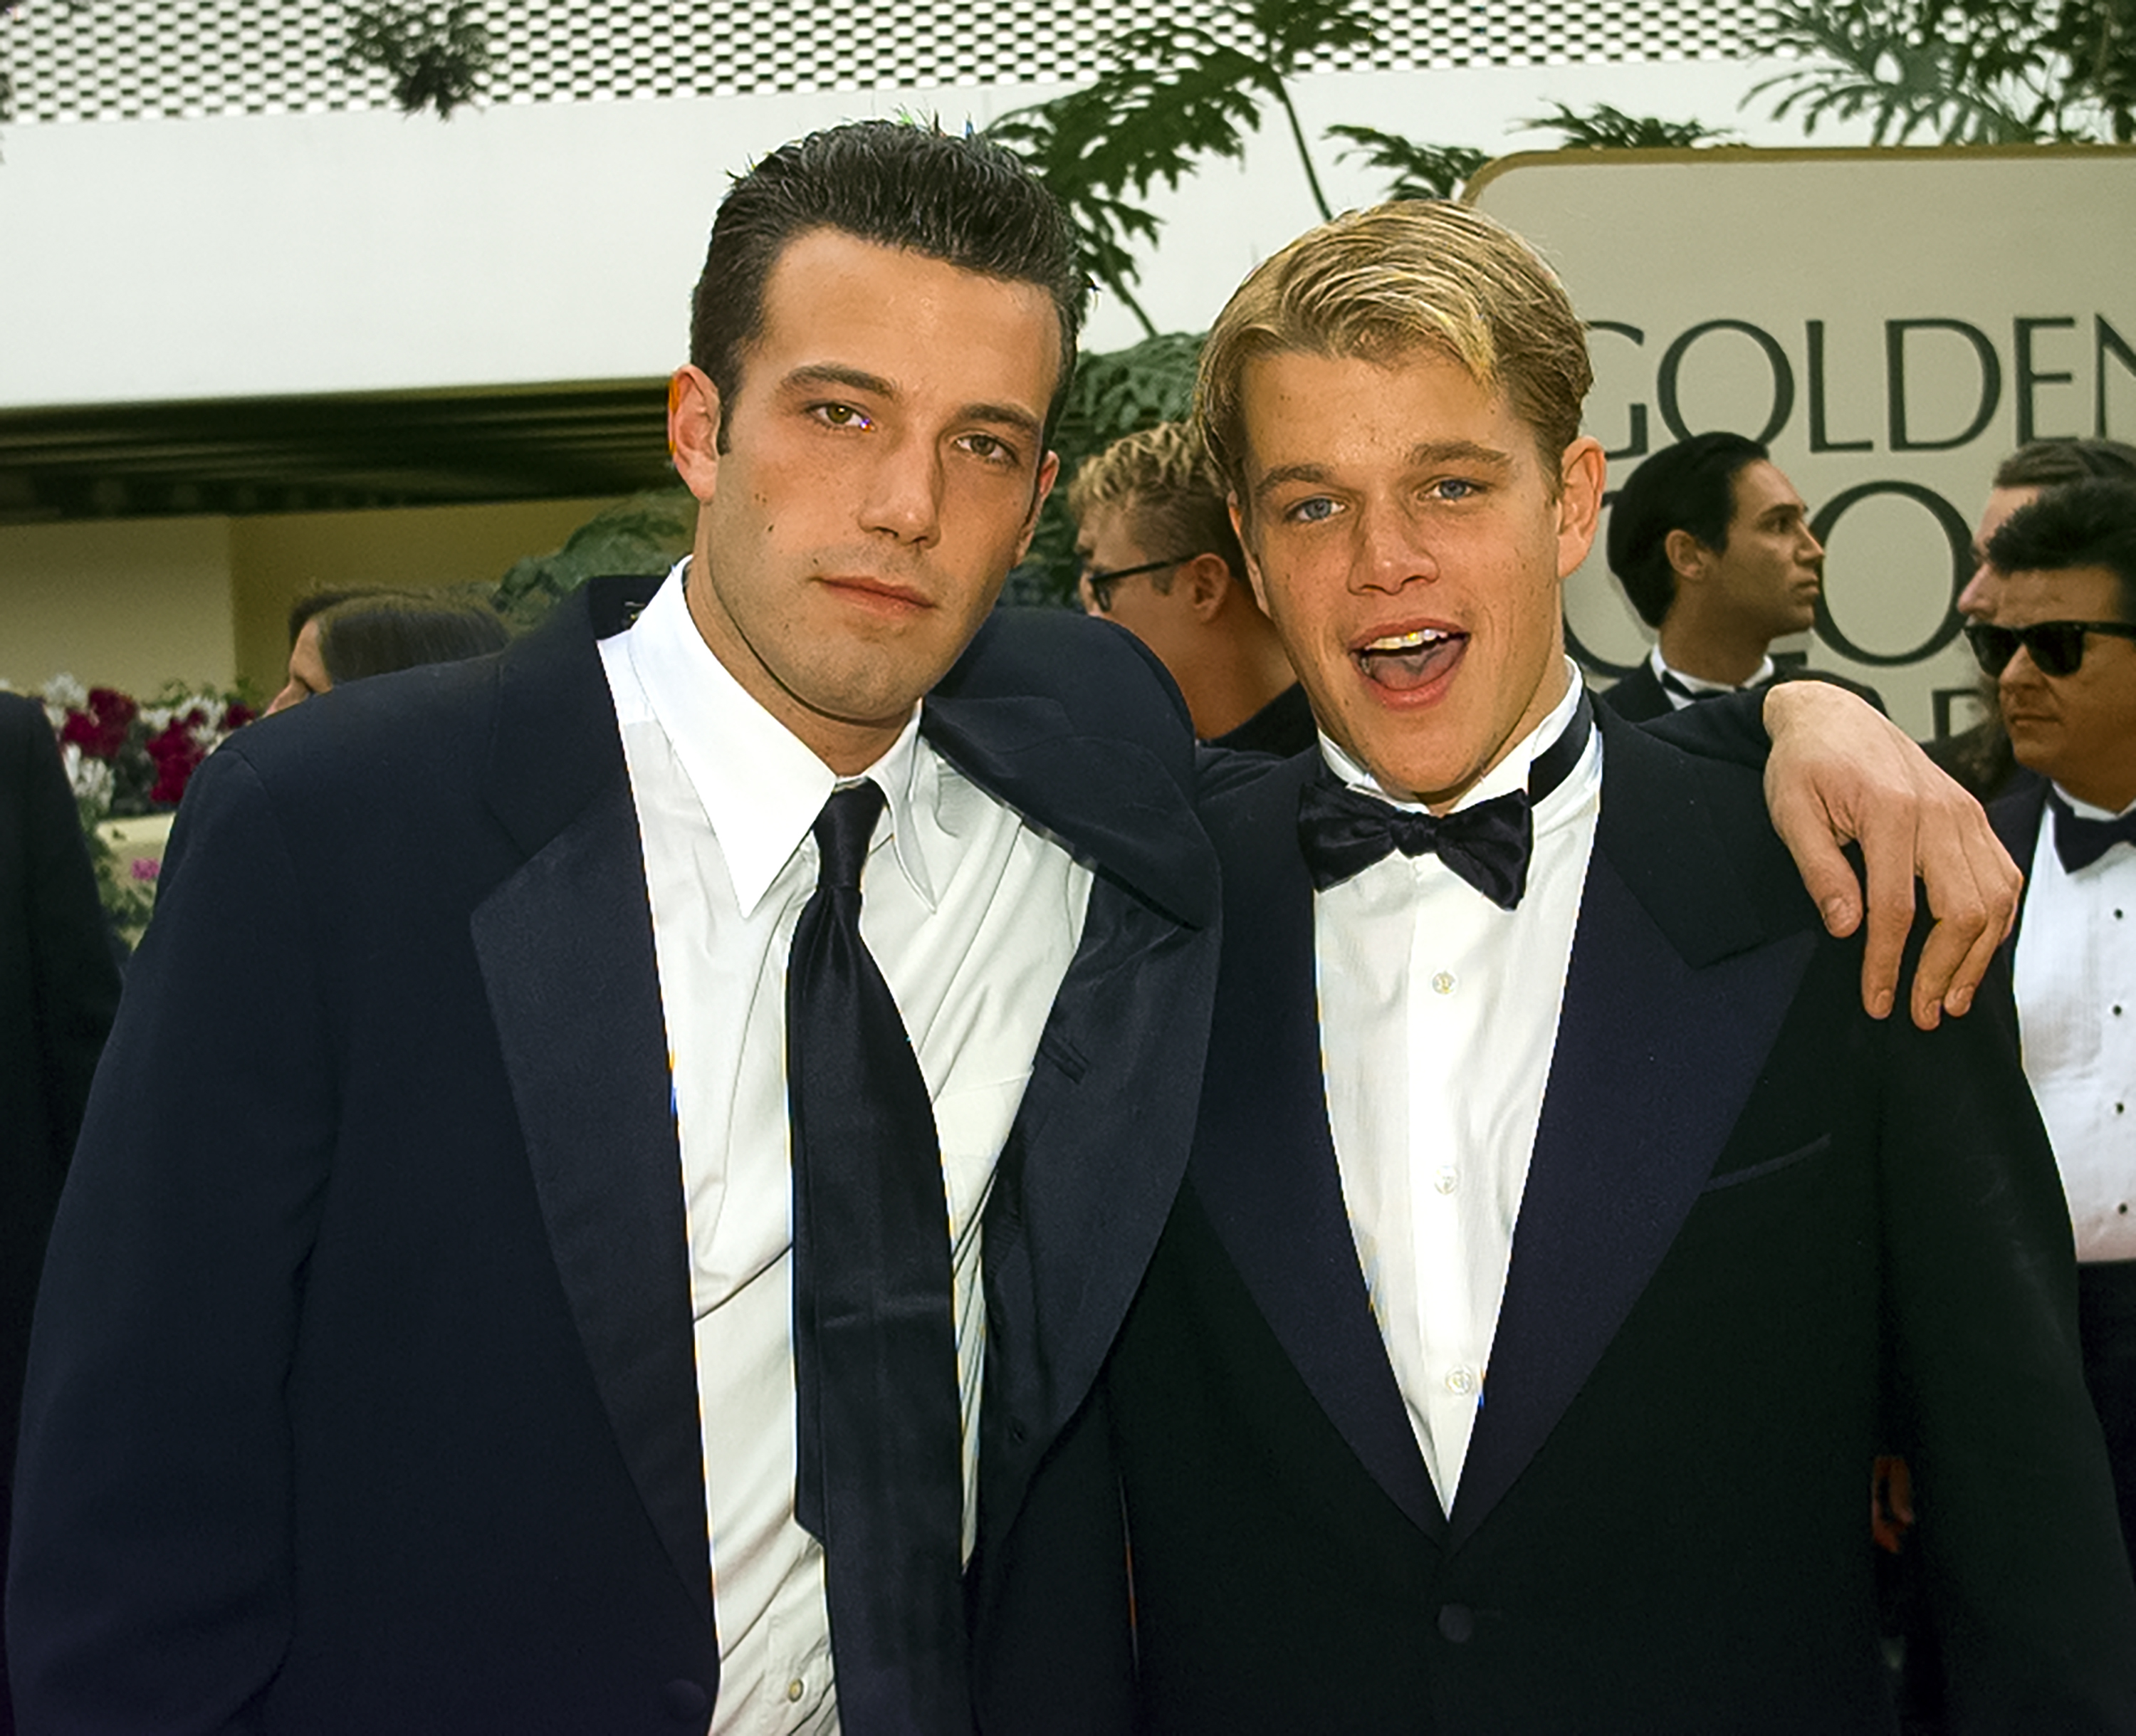 Ben Affleck and Matt Damon in tuxedos, standing together at an event